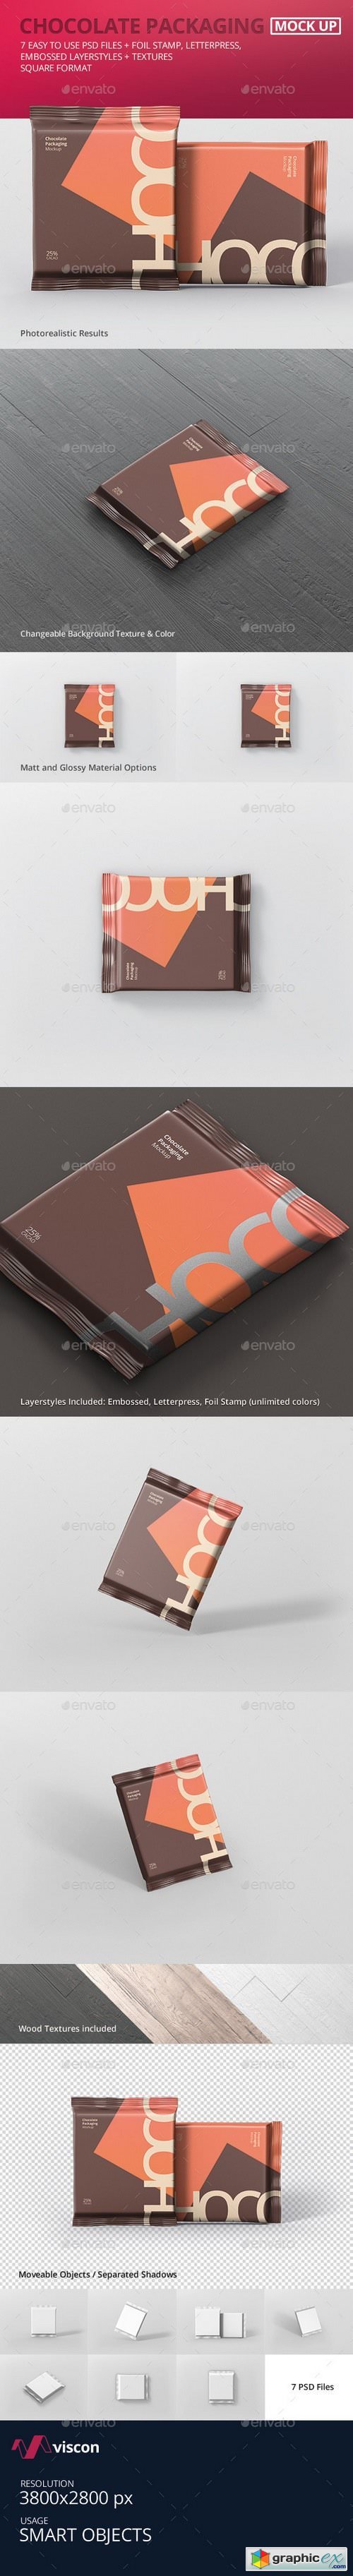 Foil Chocolate Packaging Mockup - Square Size